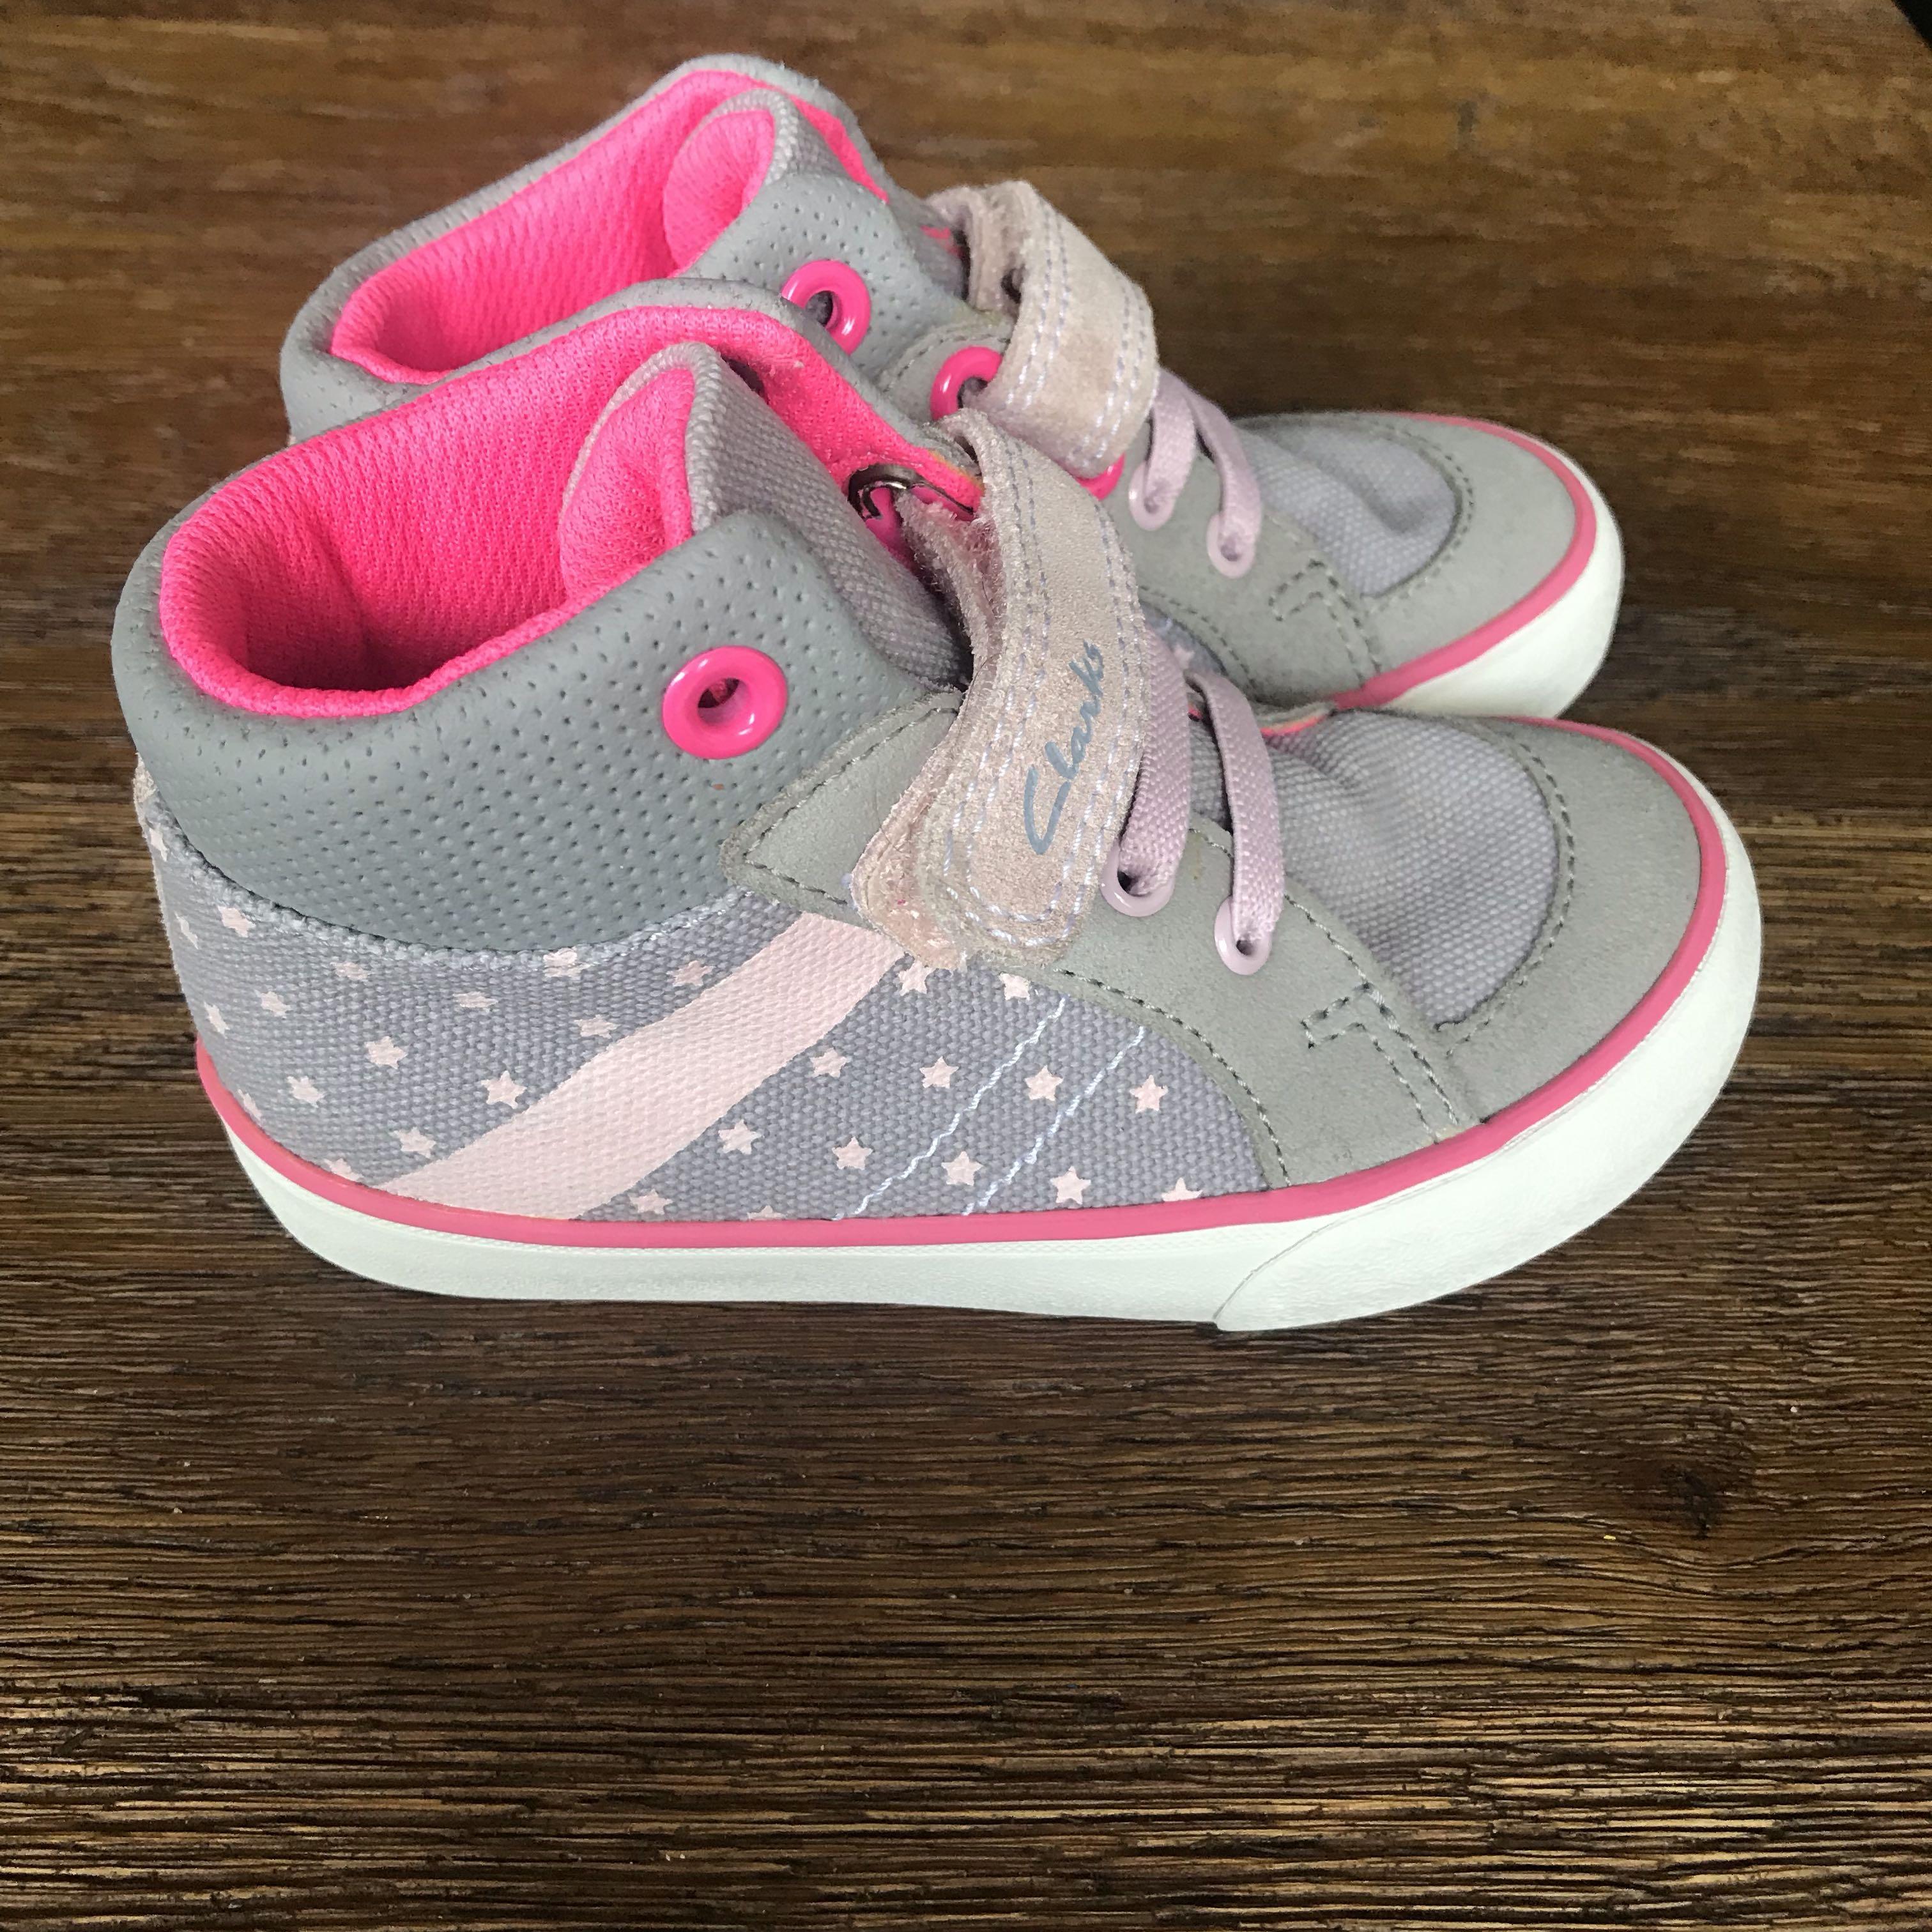 clarks shoes for toddler girl